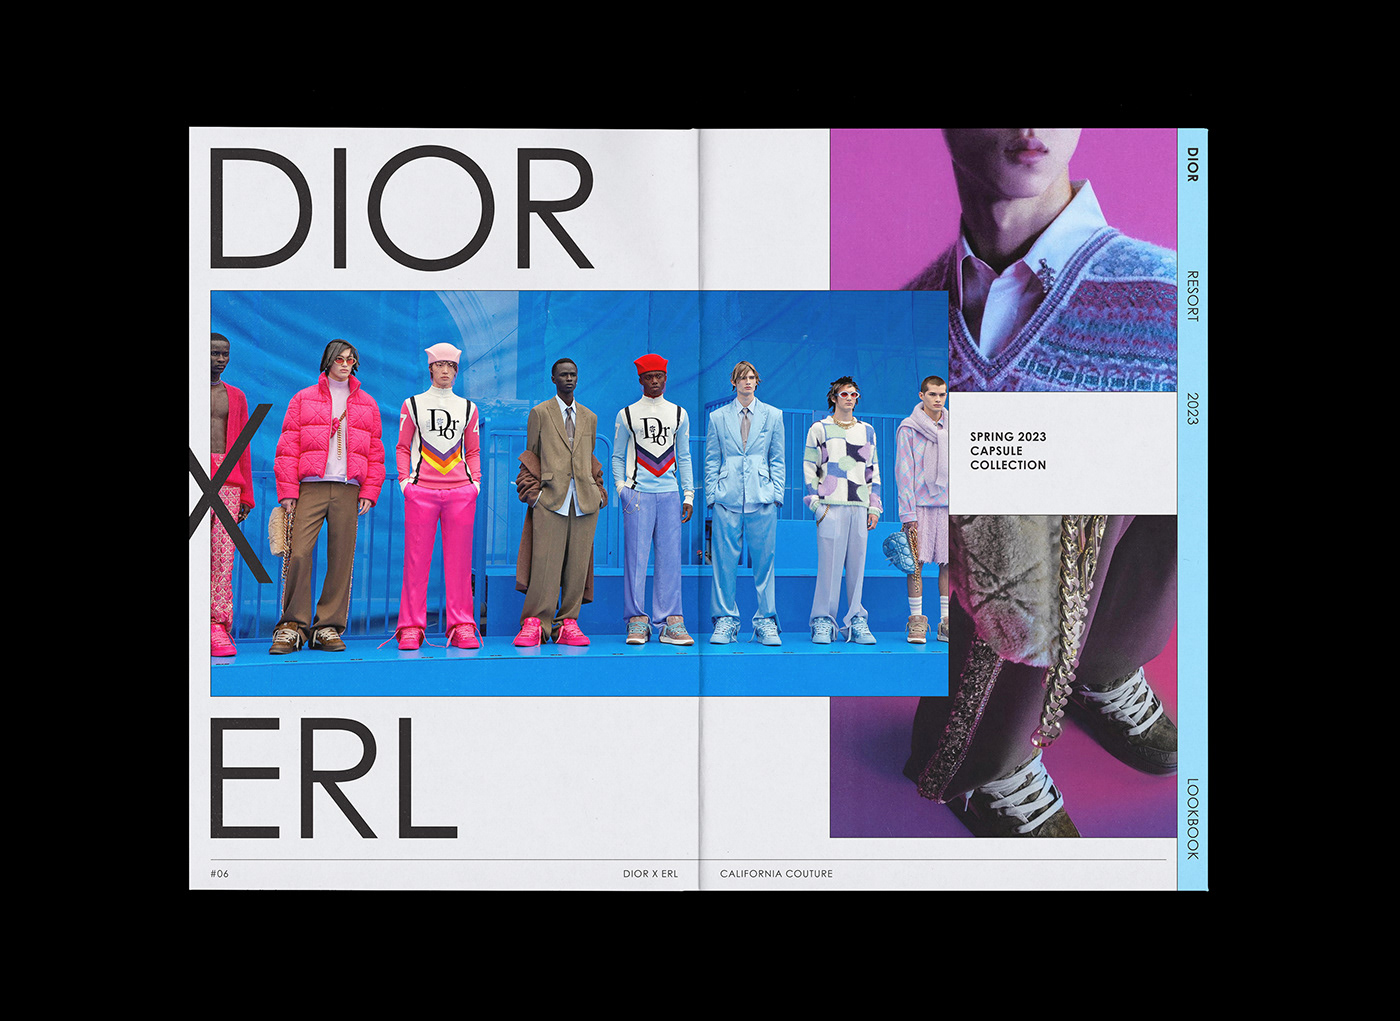 Dior x ERL — Resort 2023 Lookbook Spring 2023 Capsule Collection